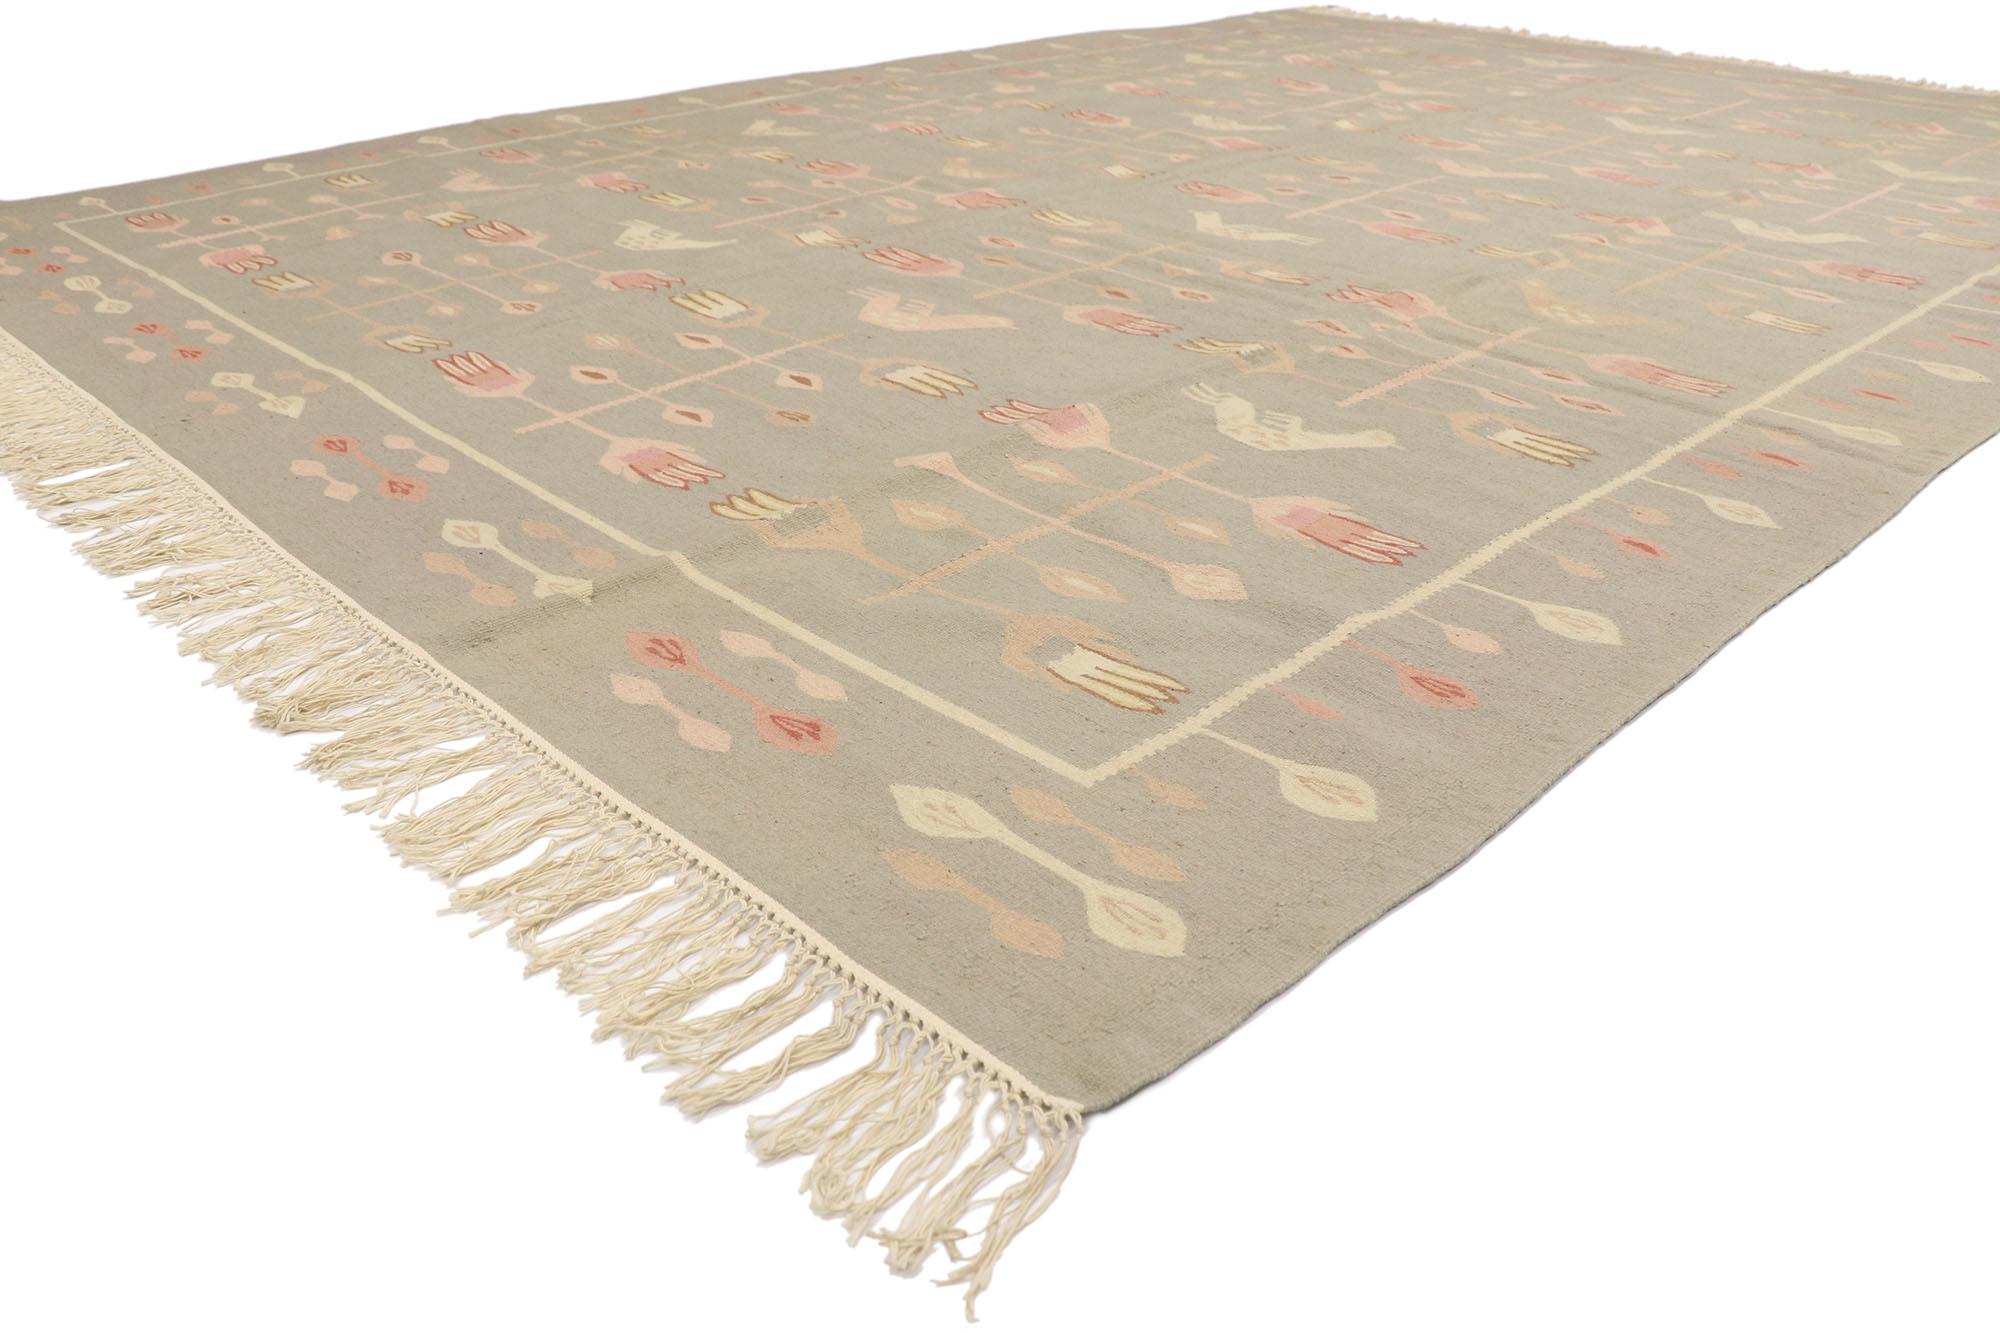 77966 Vintage Romanian Kilim rug 08'10 x 12'05. With its effortless beauty and soft colors, this hand-woven wool vintage Romanian floral kilim rug is a captivating vision of woven beauty. The abrashed gray field features a repeating geometric